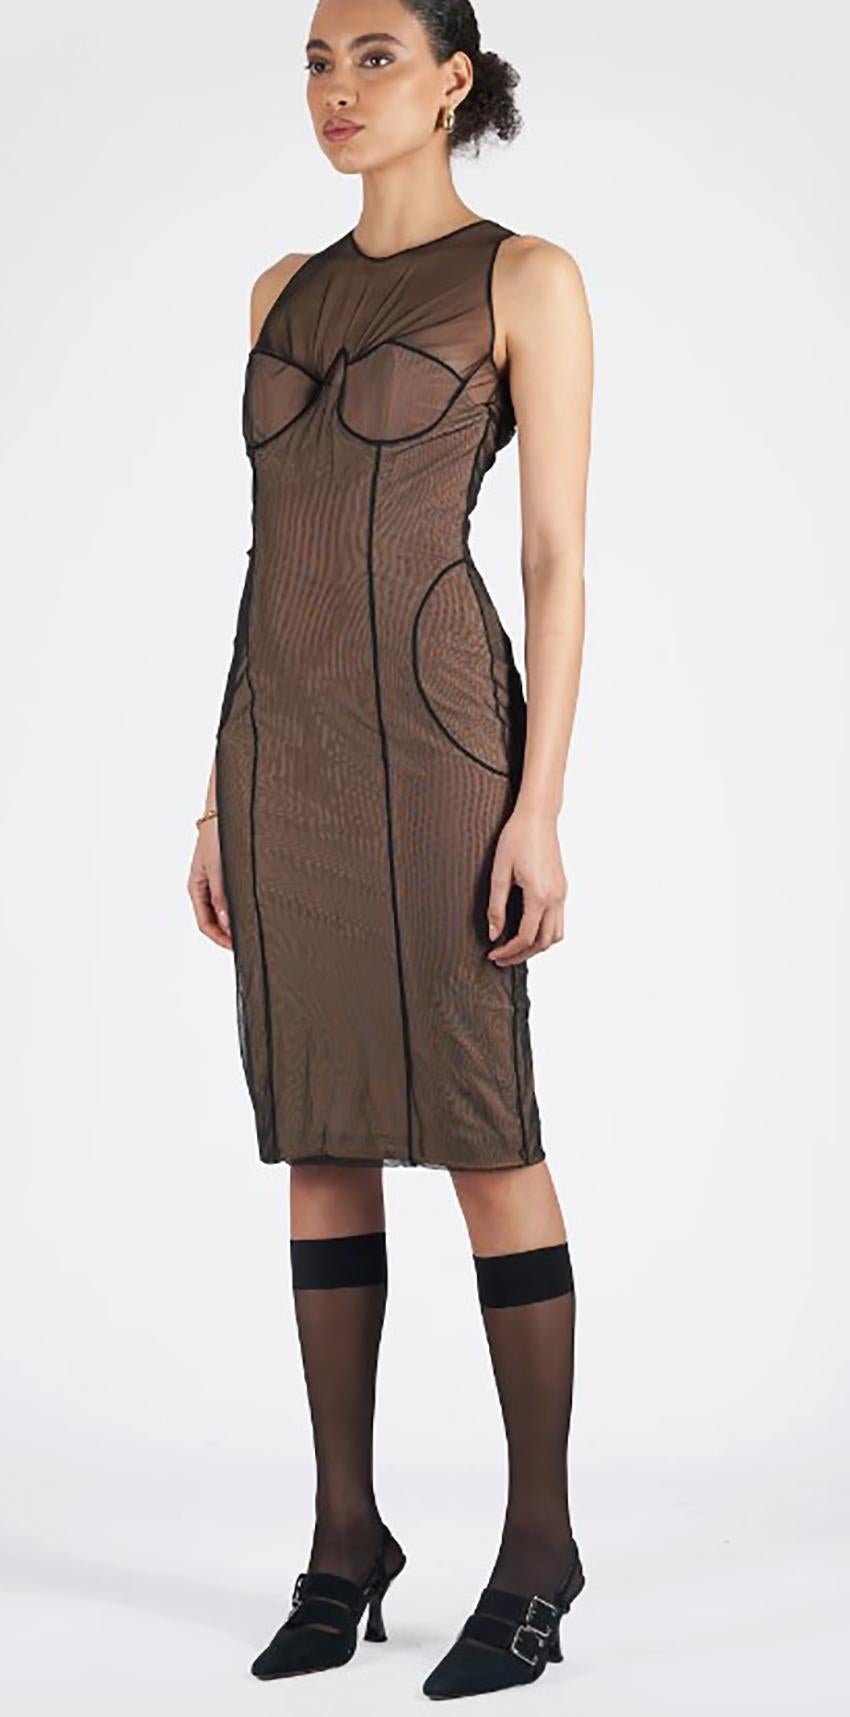 S/S 2001 TOM FORD for GUCCI VINTAGE NUDE/BLACK MESH DRESS IT 42 - US 6 In Excellent Condition In Montgomery, TX